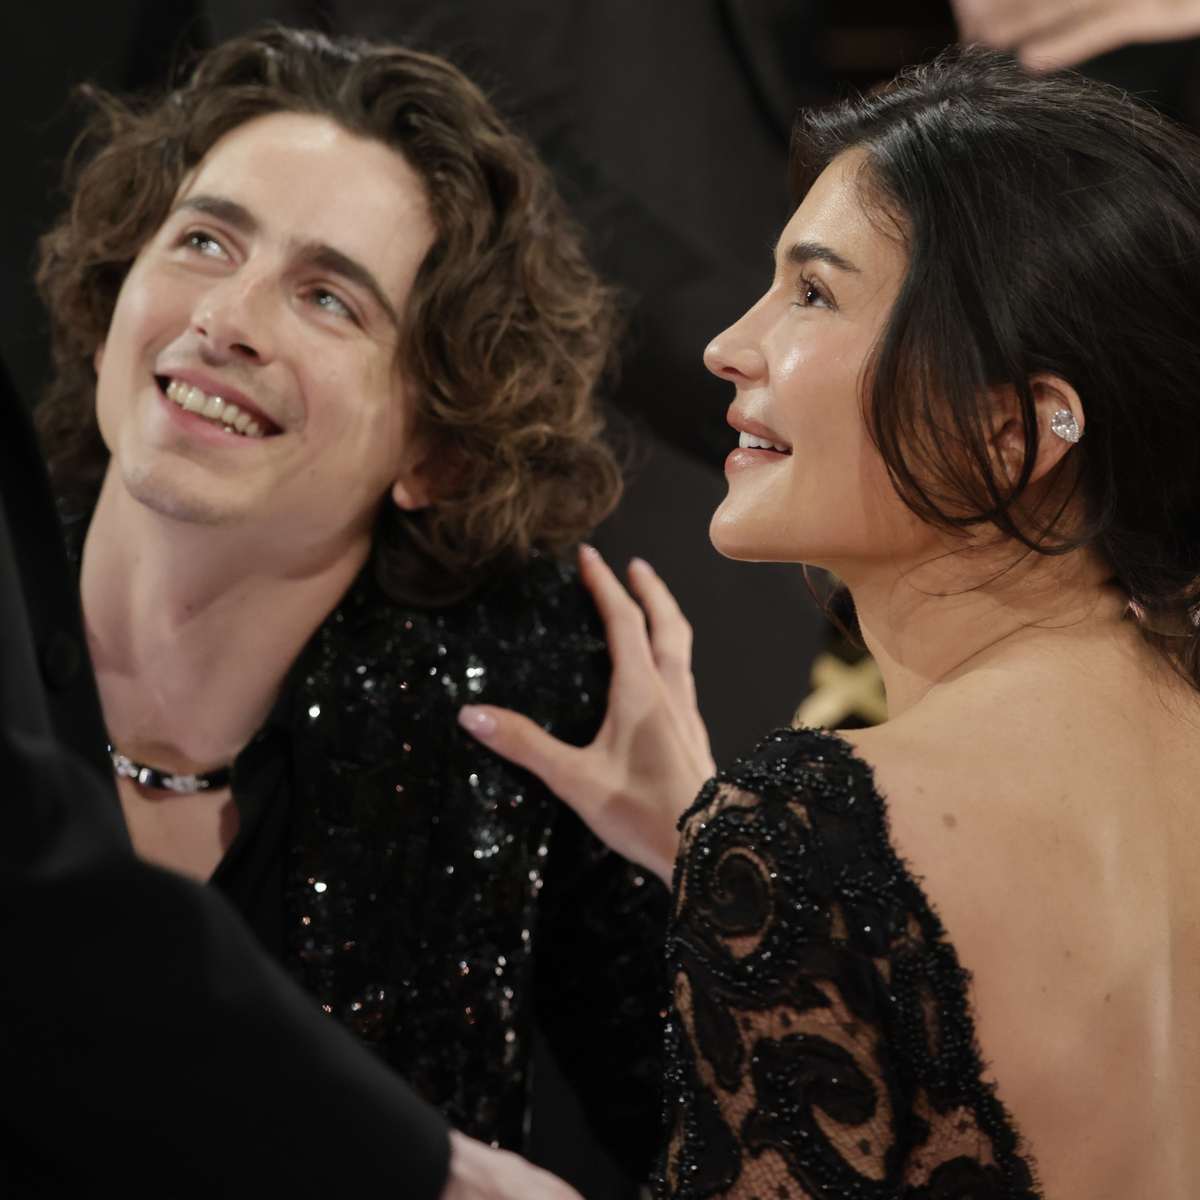 Kylie Jenner Seemingly Says “I Love You” to Timothée Chalamet